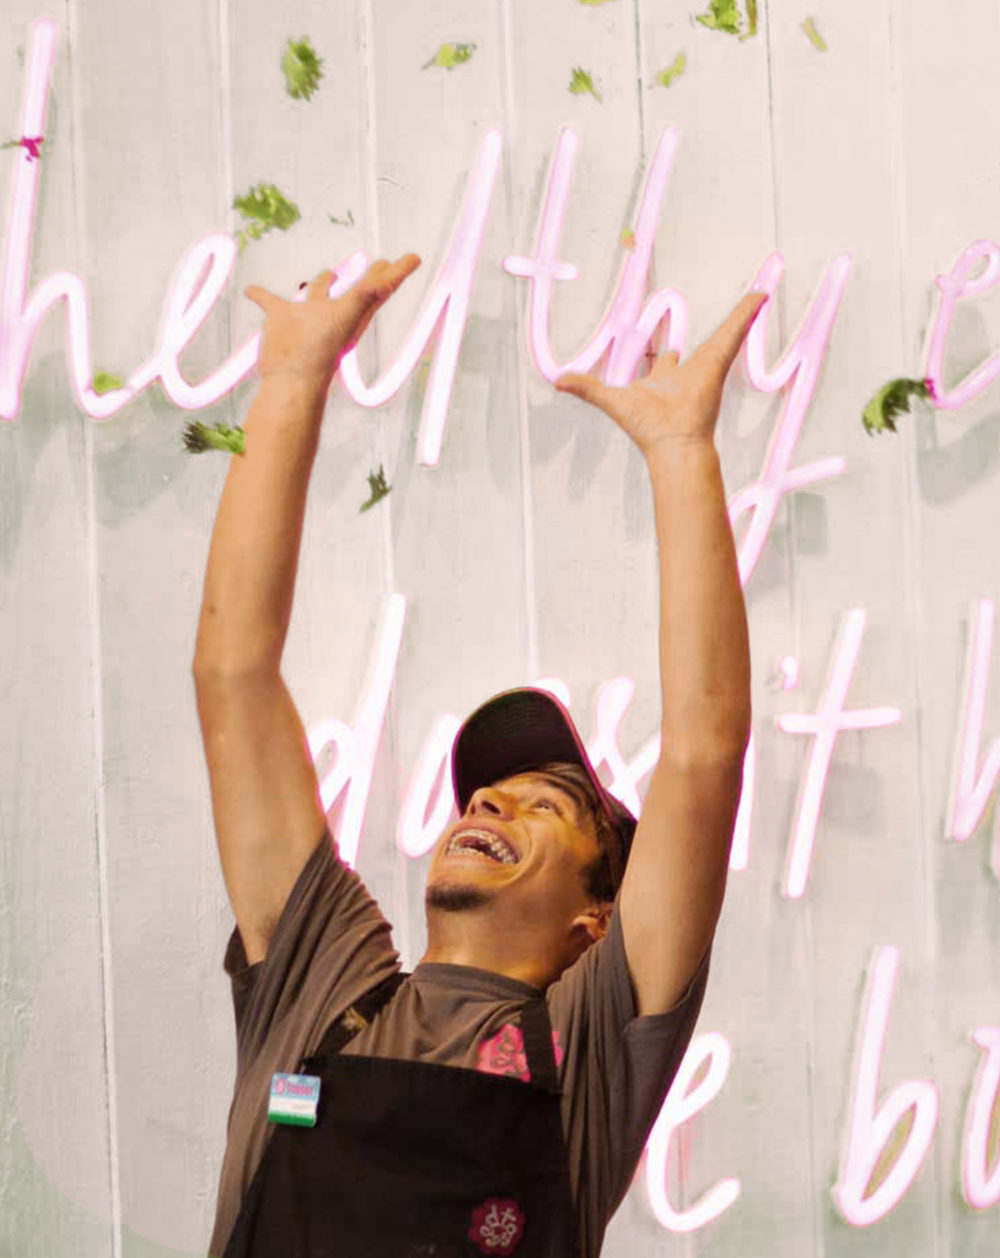 Put your hands in the air! A team member at tossed having fun